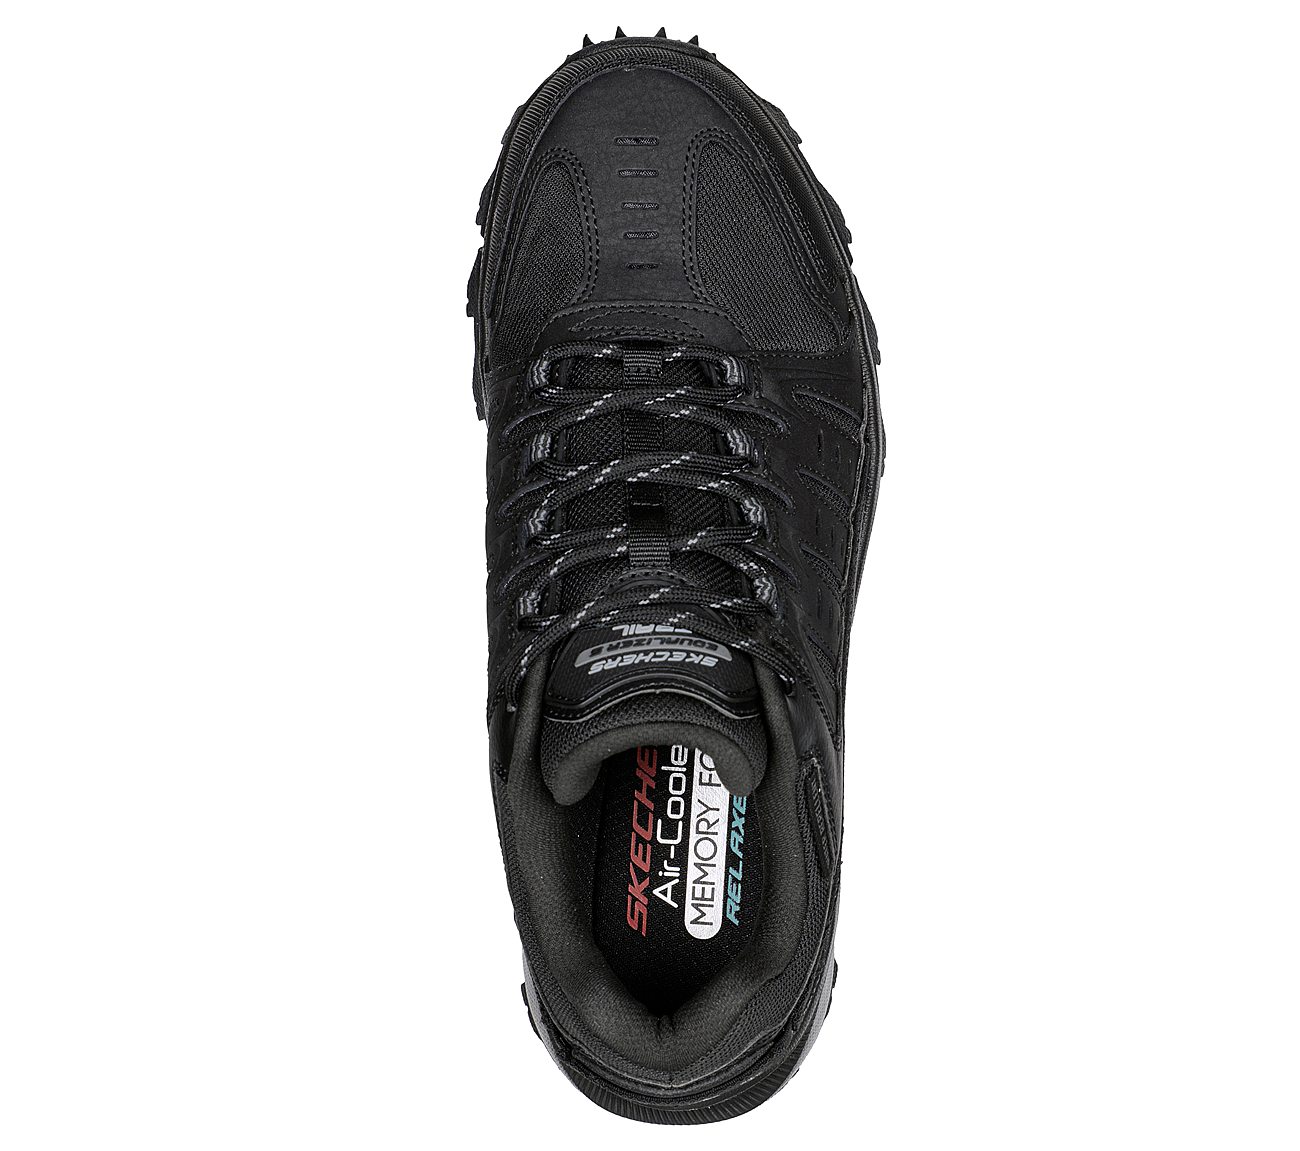 EQUALIZER 5.0 TRAIL - SOLIX, BBLACK Footwear Top View